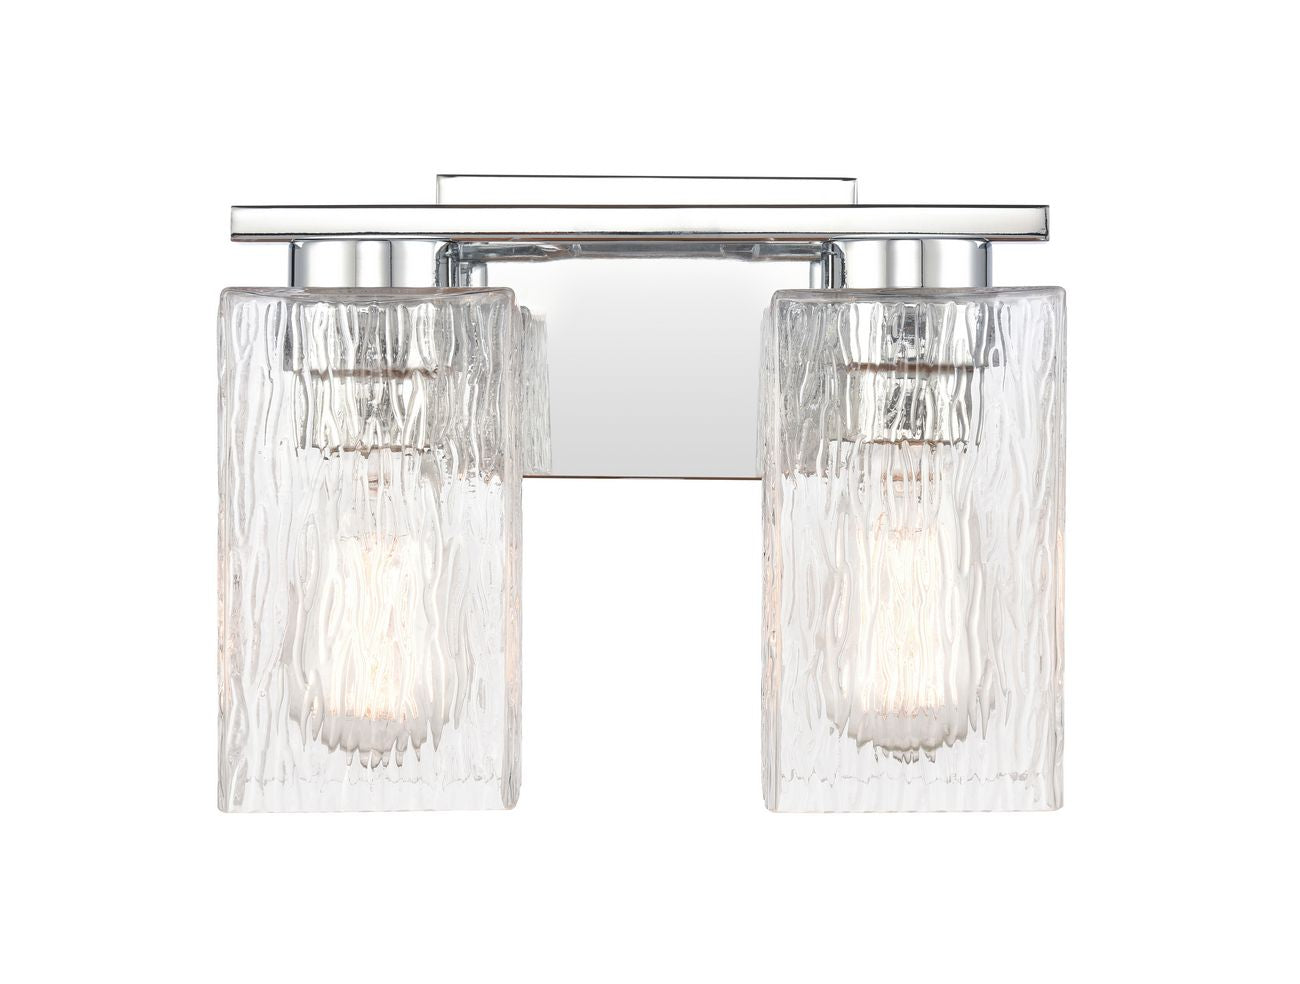 419-2W-PC-G4192 2-Light 11.25" Polished Chrome Bath Vanity Light - Clear Rippled Juneau Glass Glass - LED Bulb - Dimmensions: 11.25 x 6.5 x 8 - Glass Up or Down: Yes